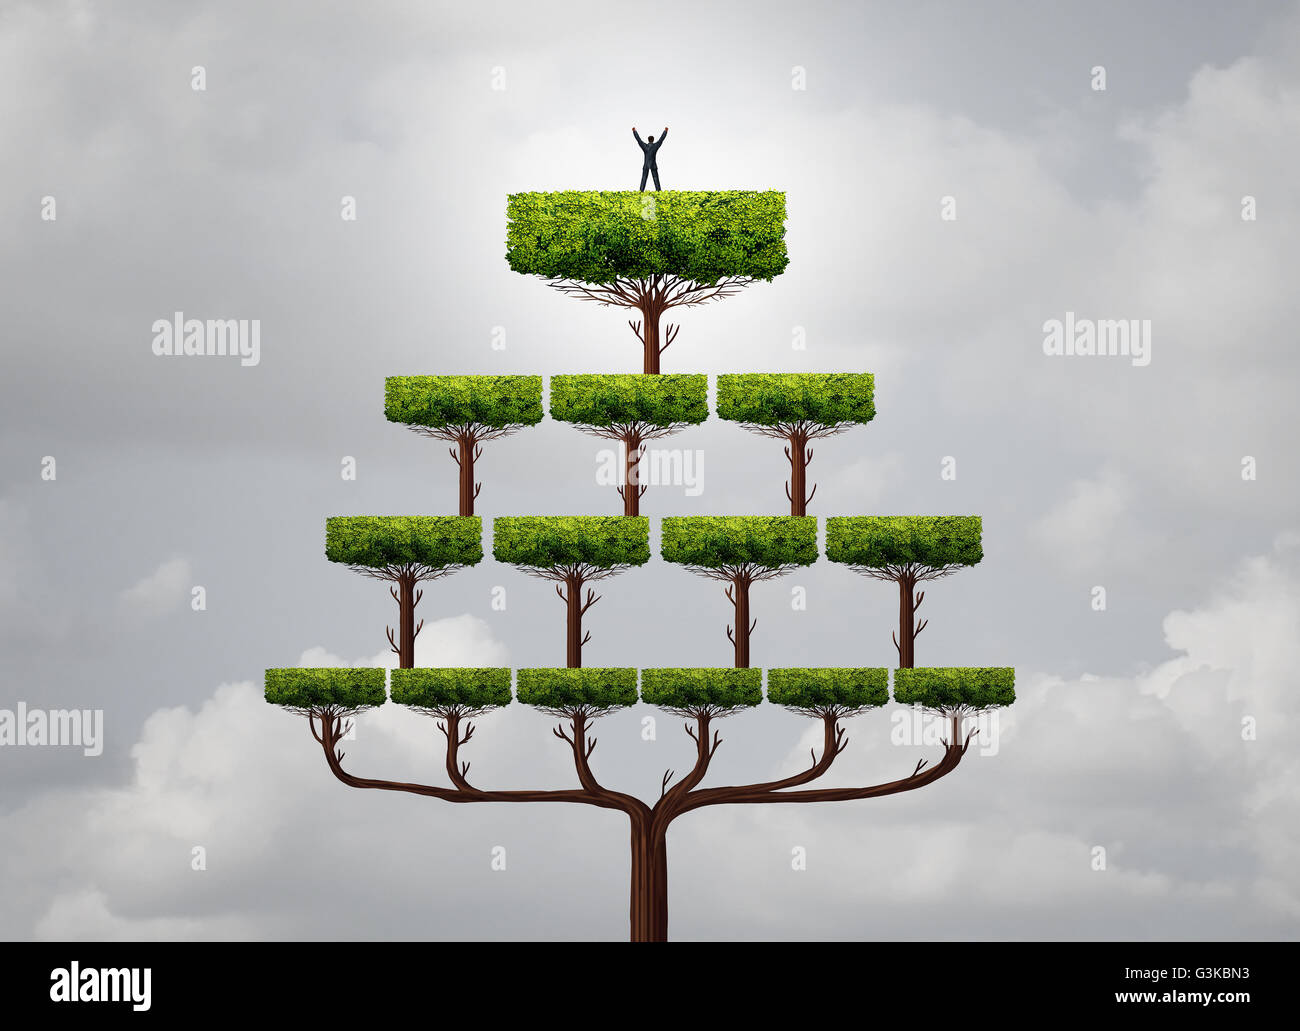 Business success climb as a businessman rise to the top as a peron on the summit of a pyramid tree structure as a financial metaphor for reaching career goals in a 3D illustration style. Stock Photo